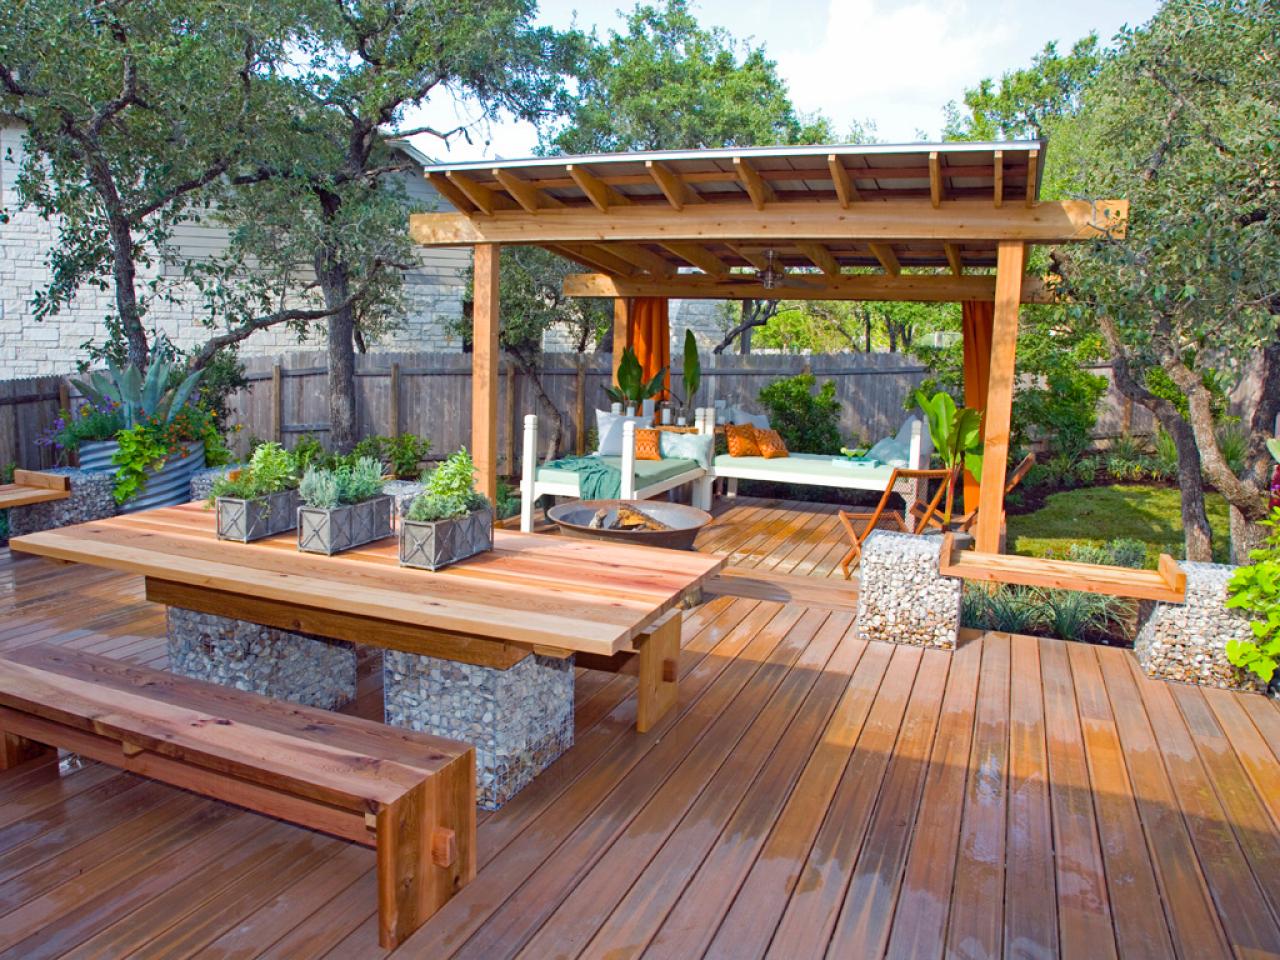 19 Ways To Create A Dream Deck Where You’ll Love Relaxing